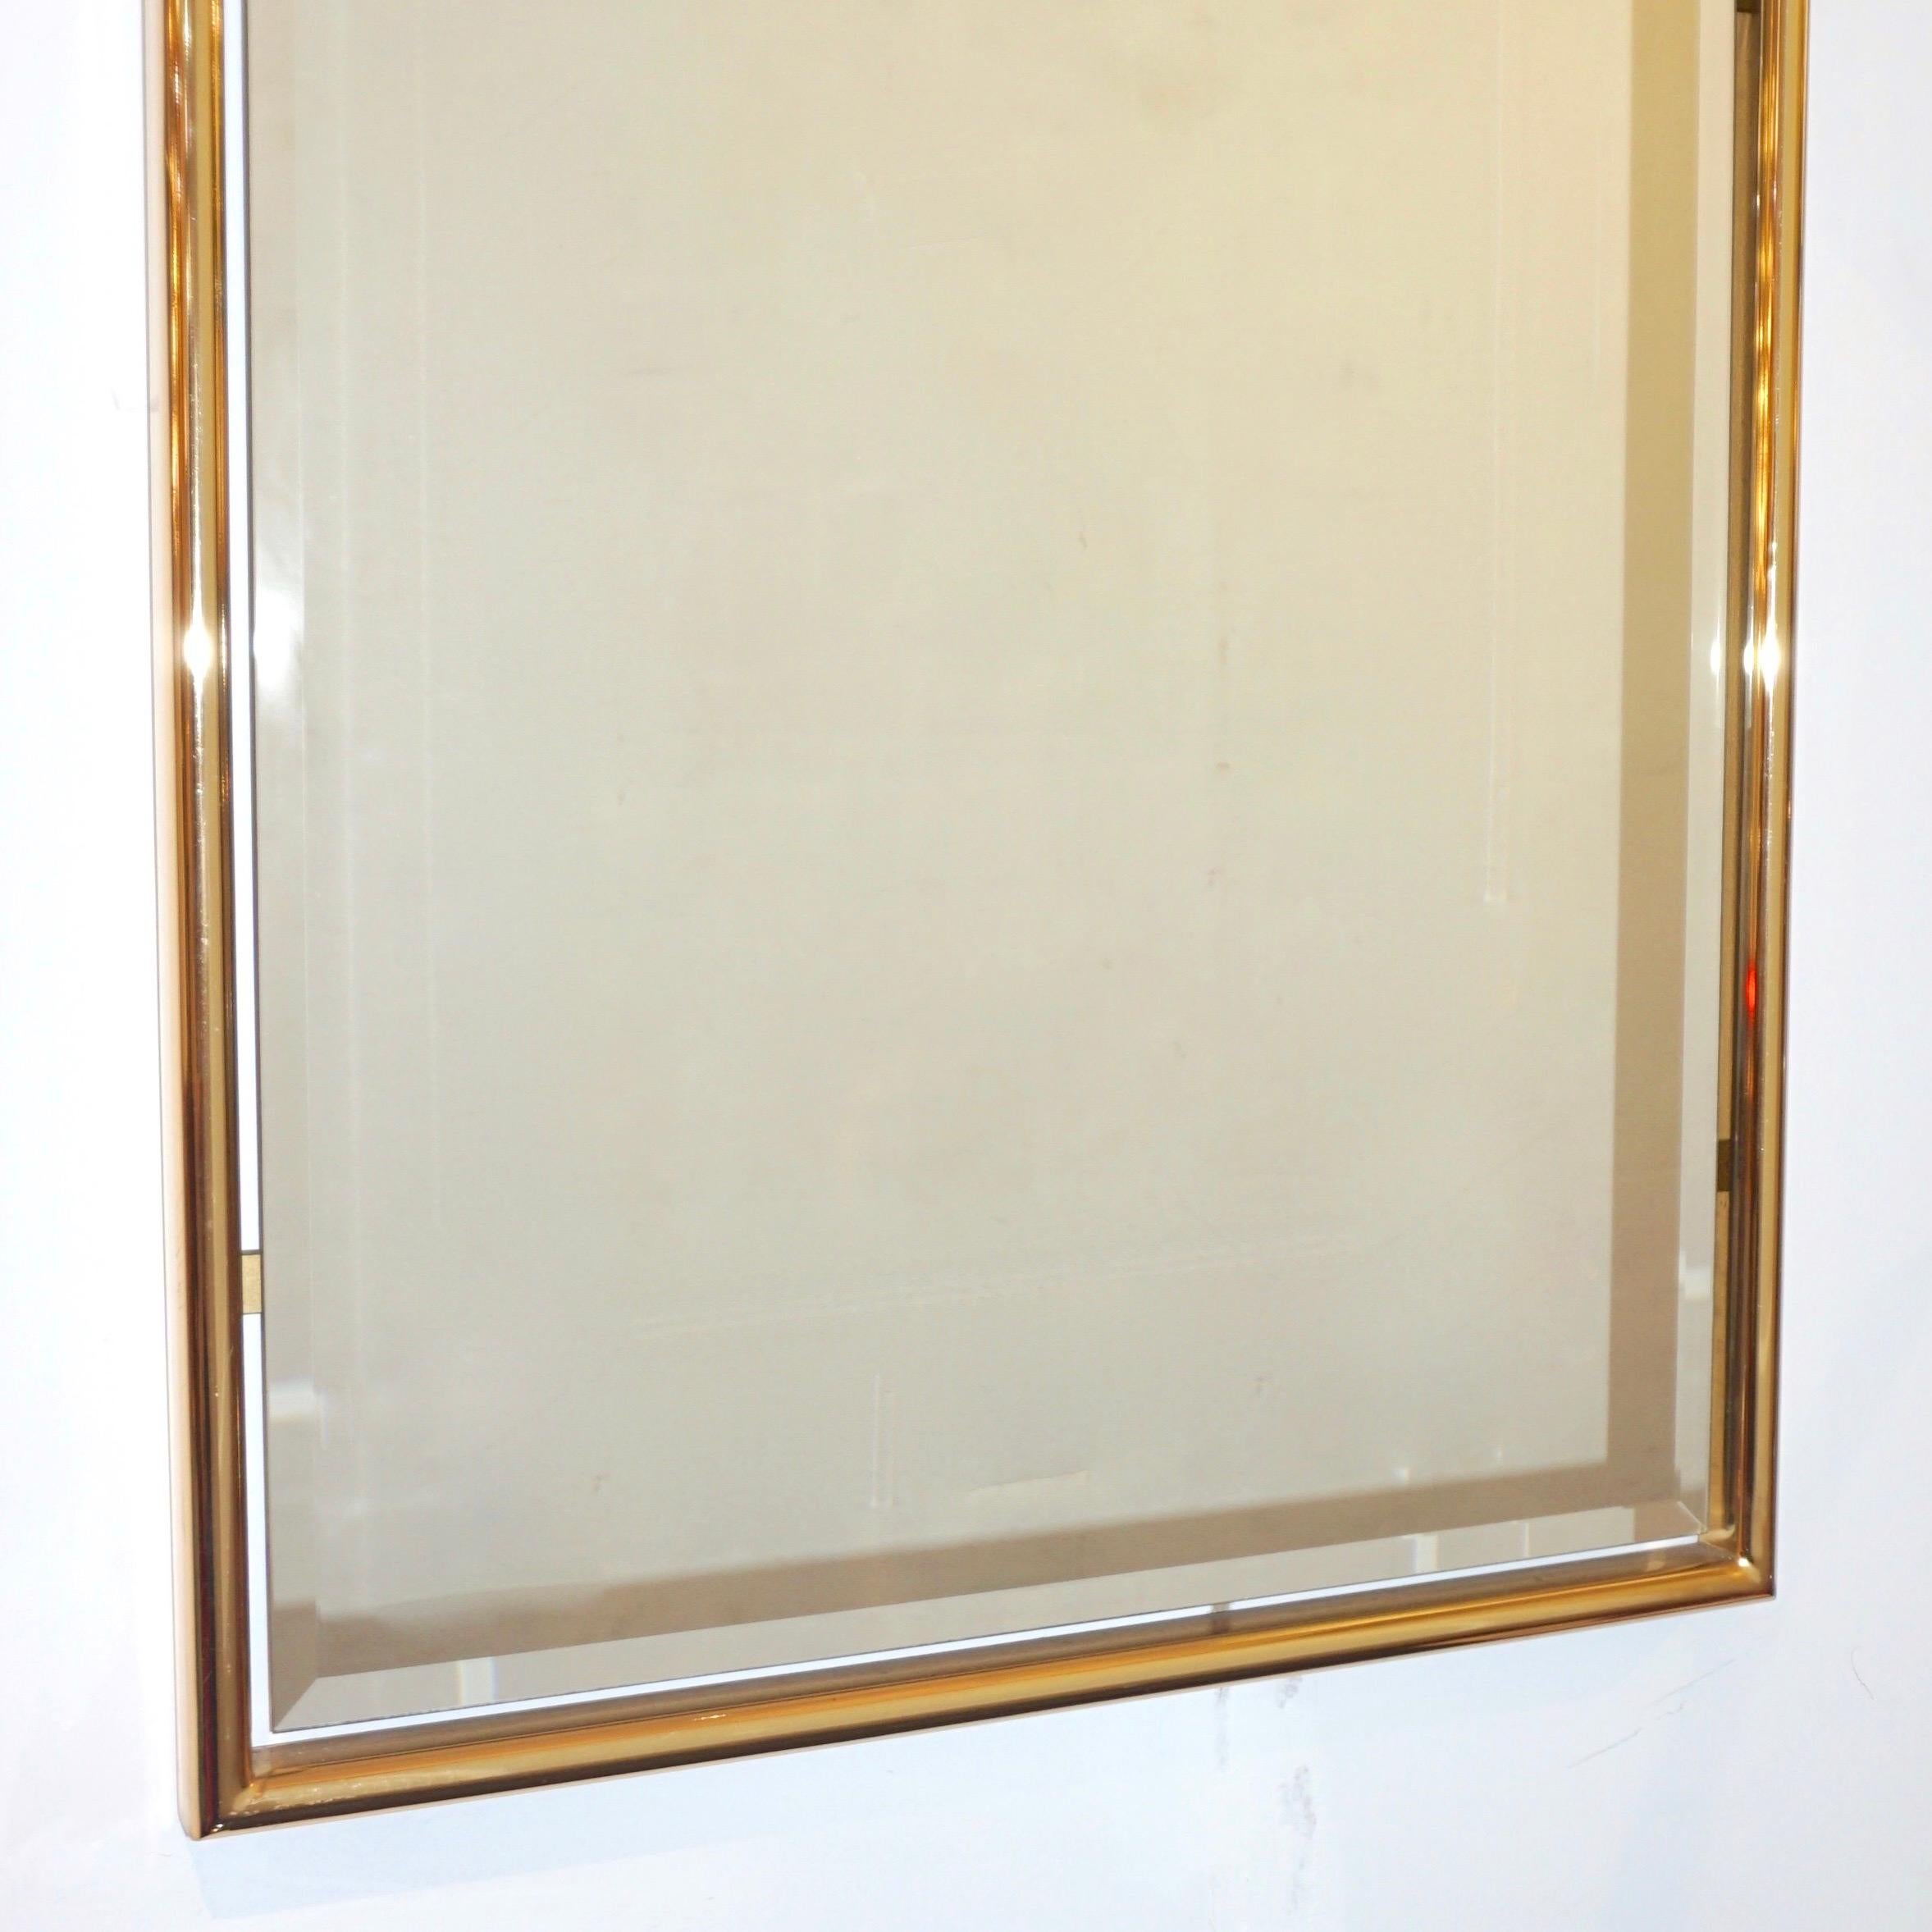 1960s Italian Minimalist Brass Full Floating Mirror with Round Arched Top Frame For Sale 3